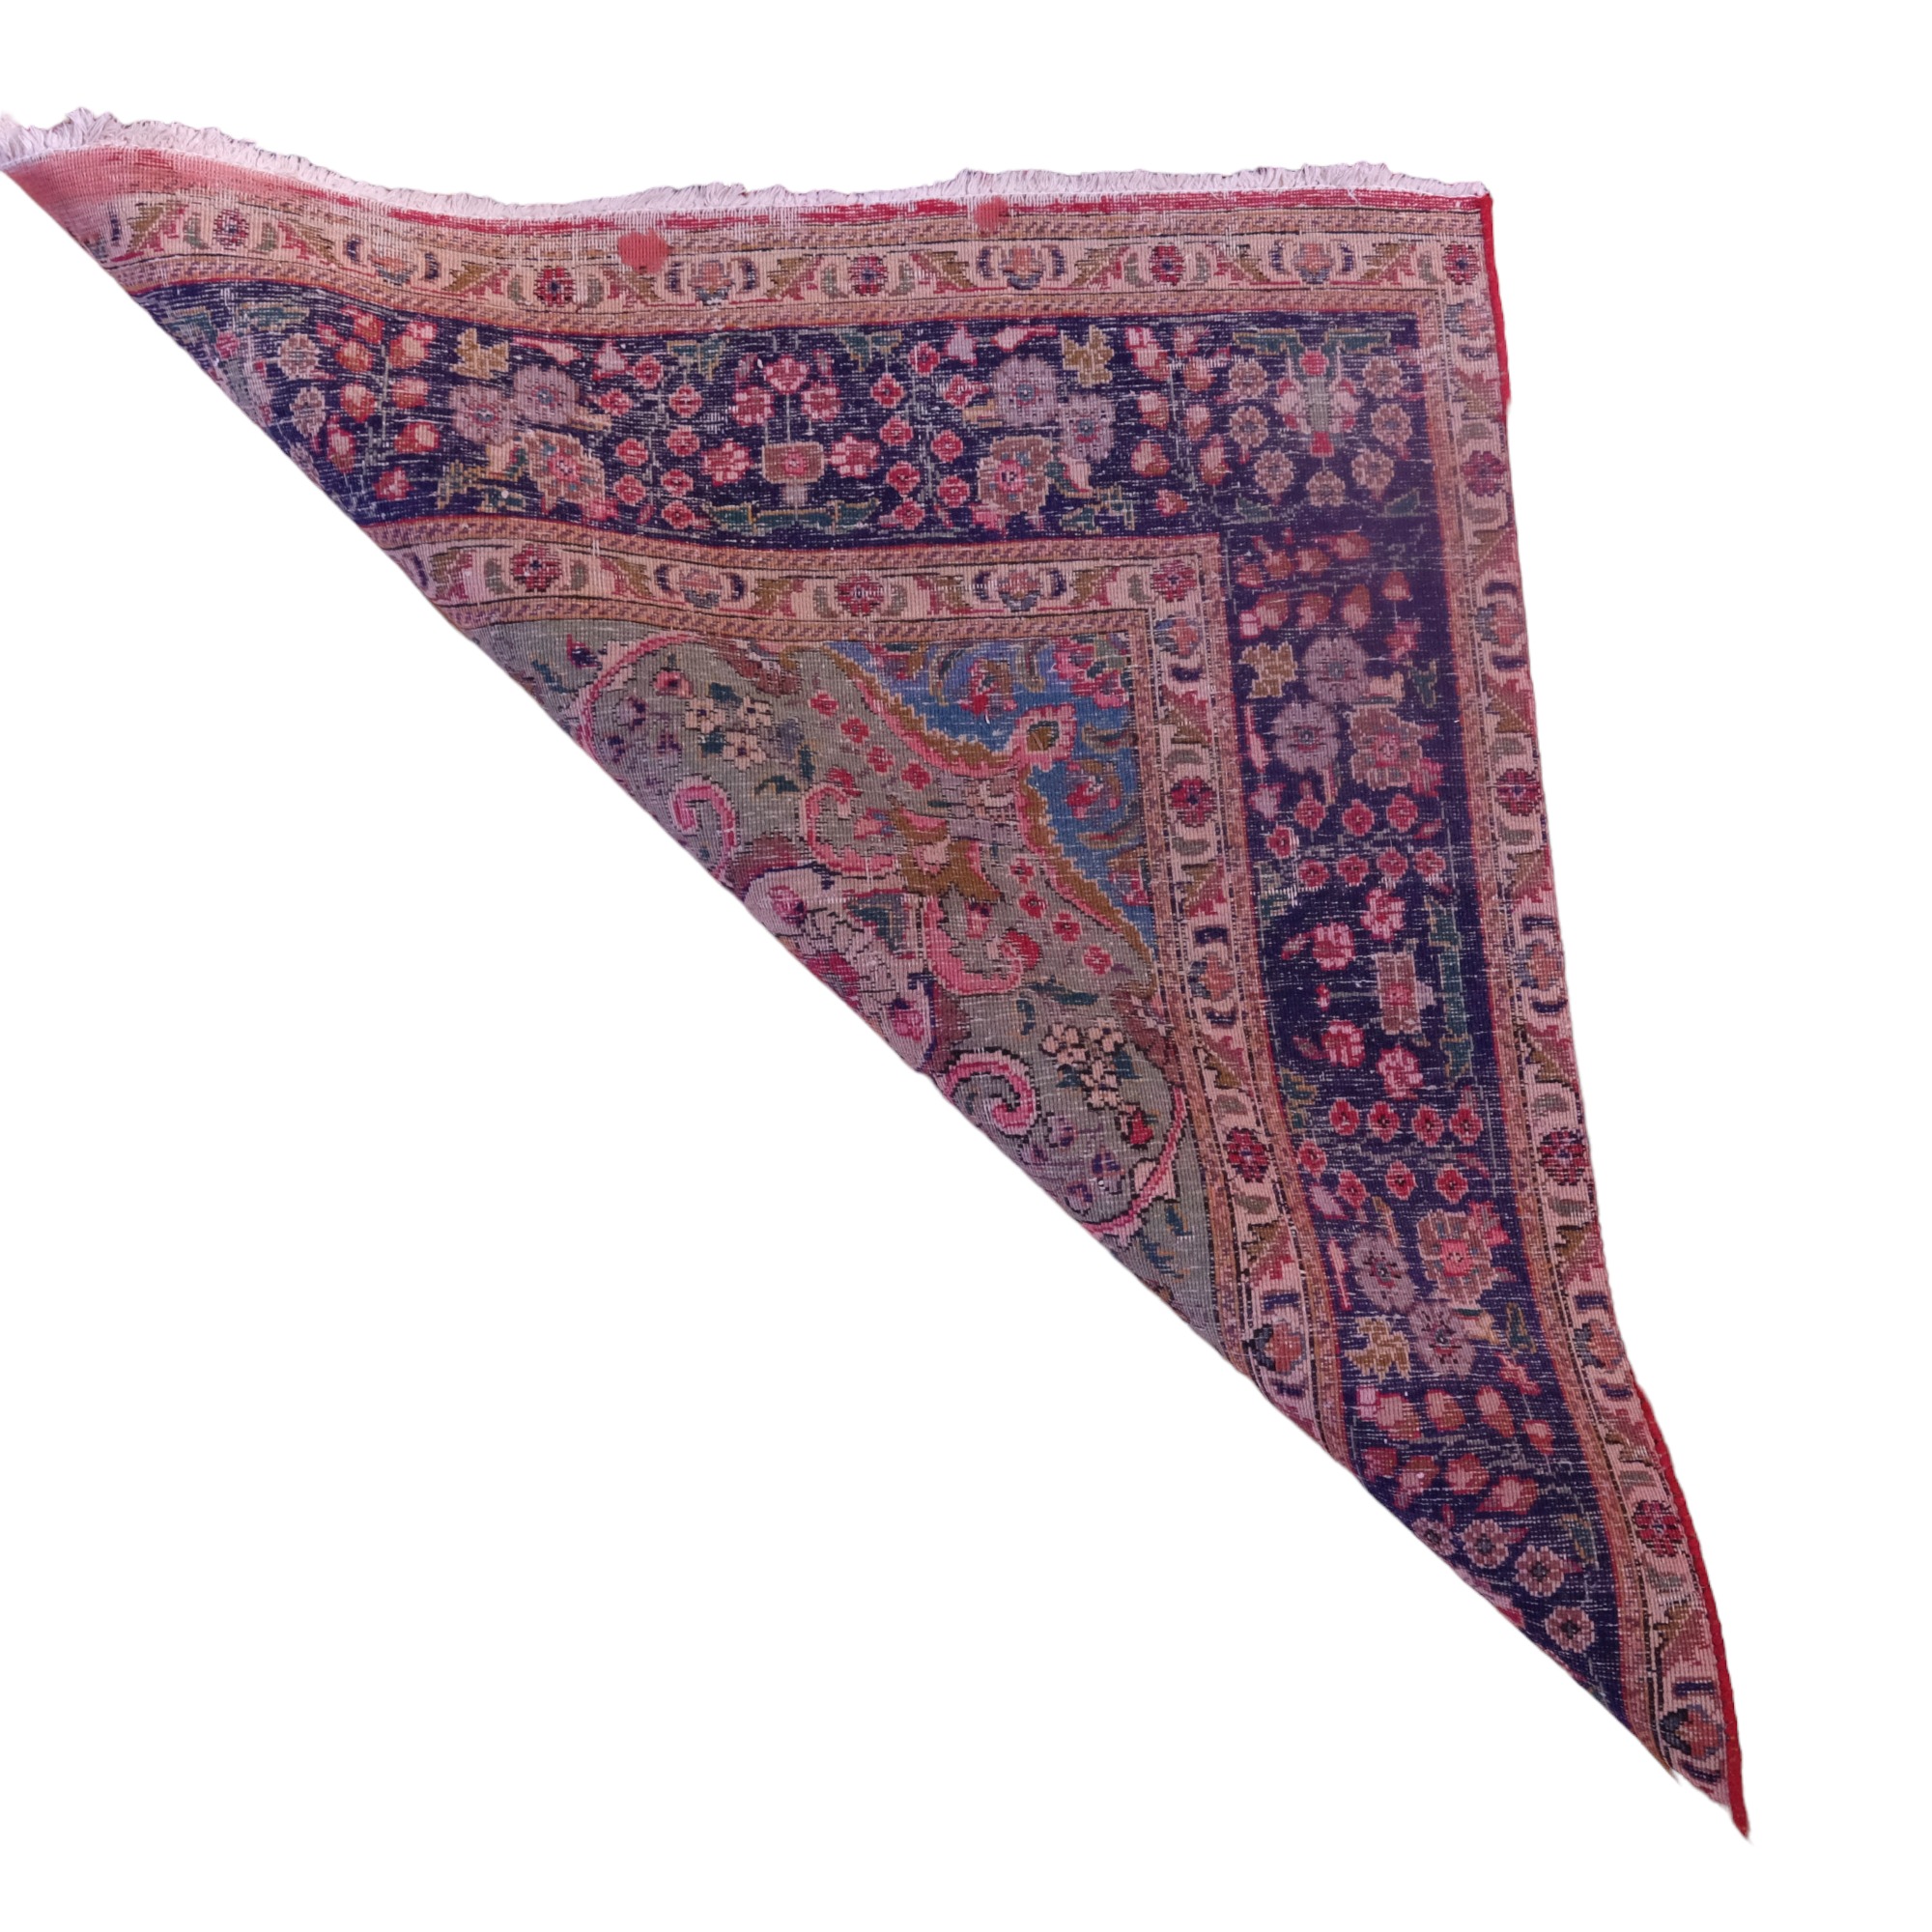 A large Keshan Persian hand-knotted wool-pile rug, 320 x 190 cm - Image 2 of 2